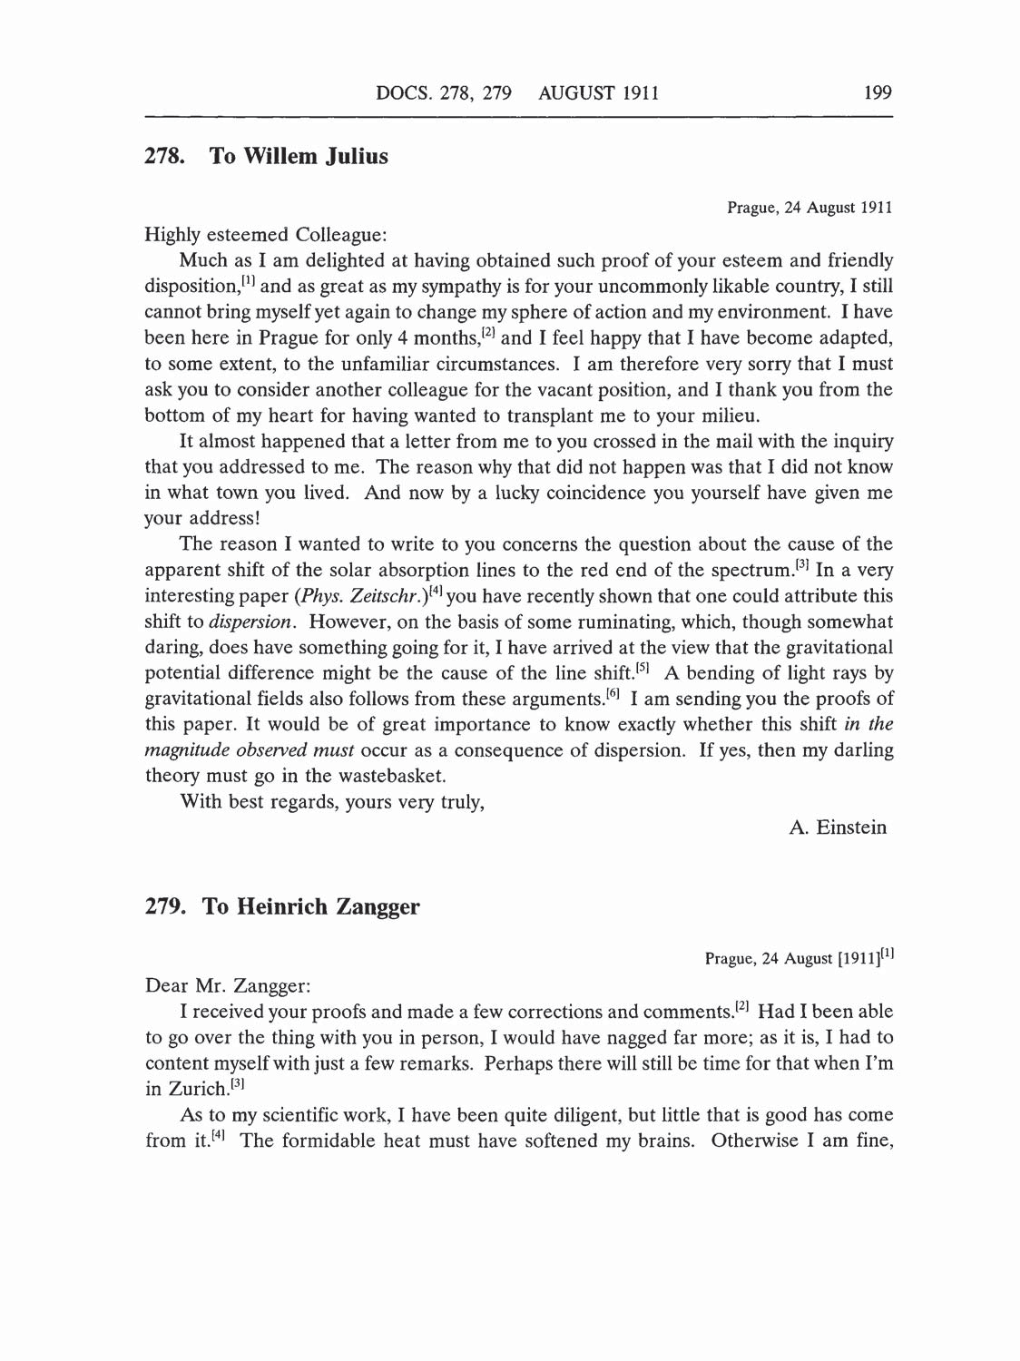 Volume 5: The Swiss Years: Correspondence, 1902-1914 (English translation supplement) page 199